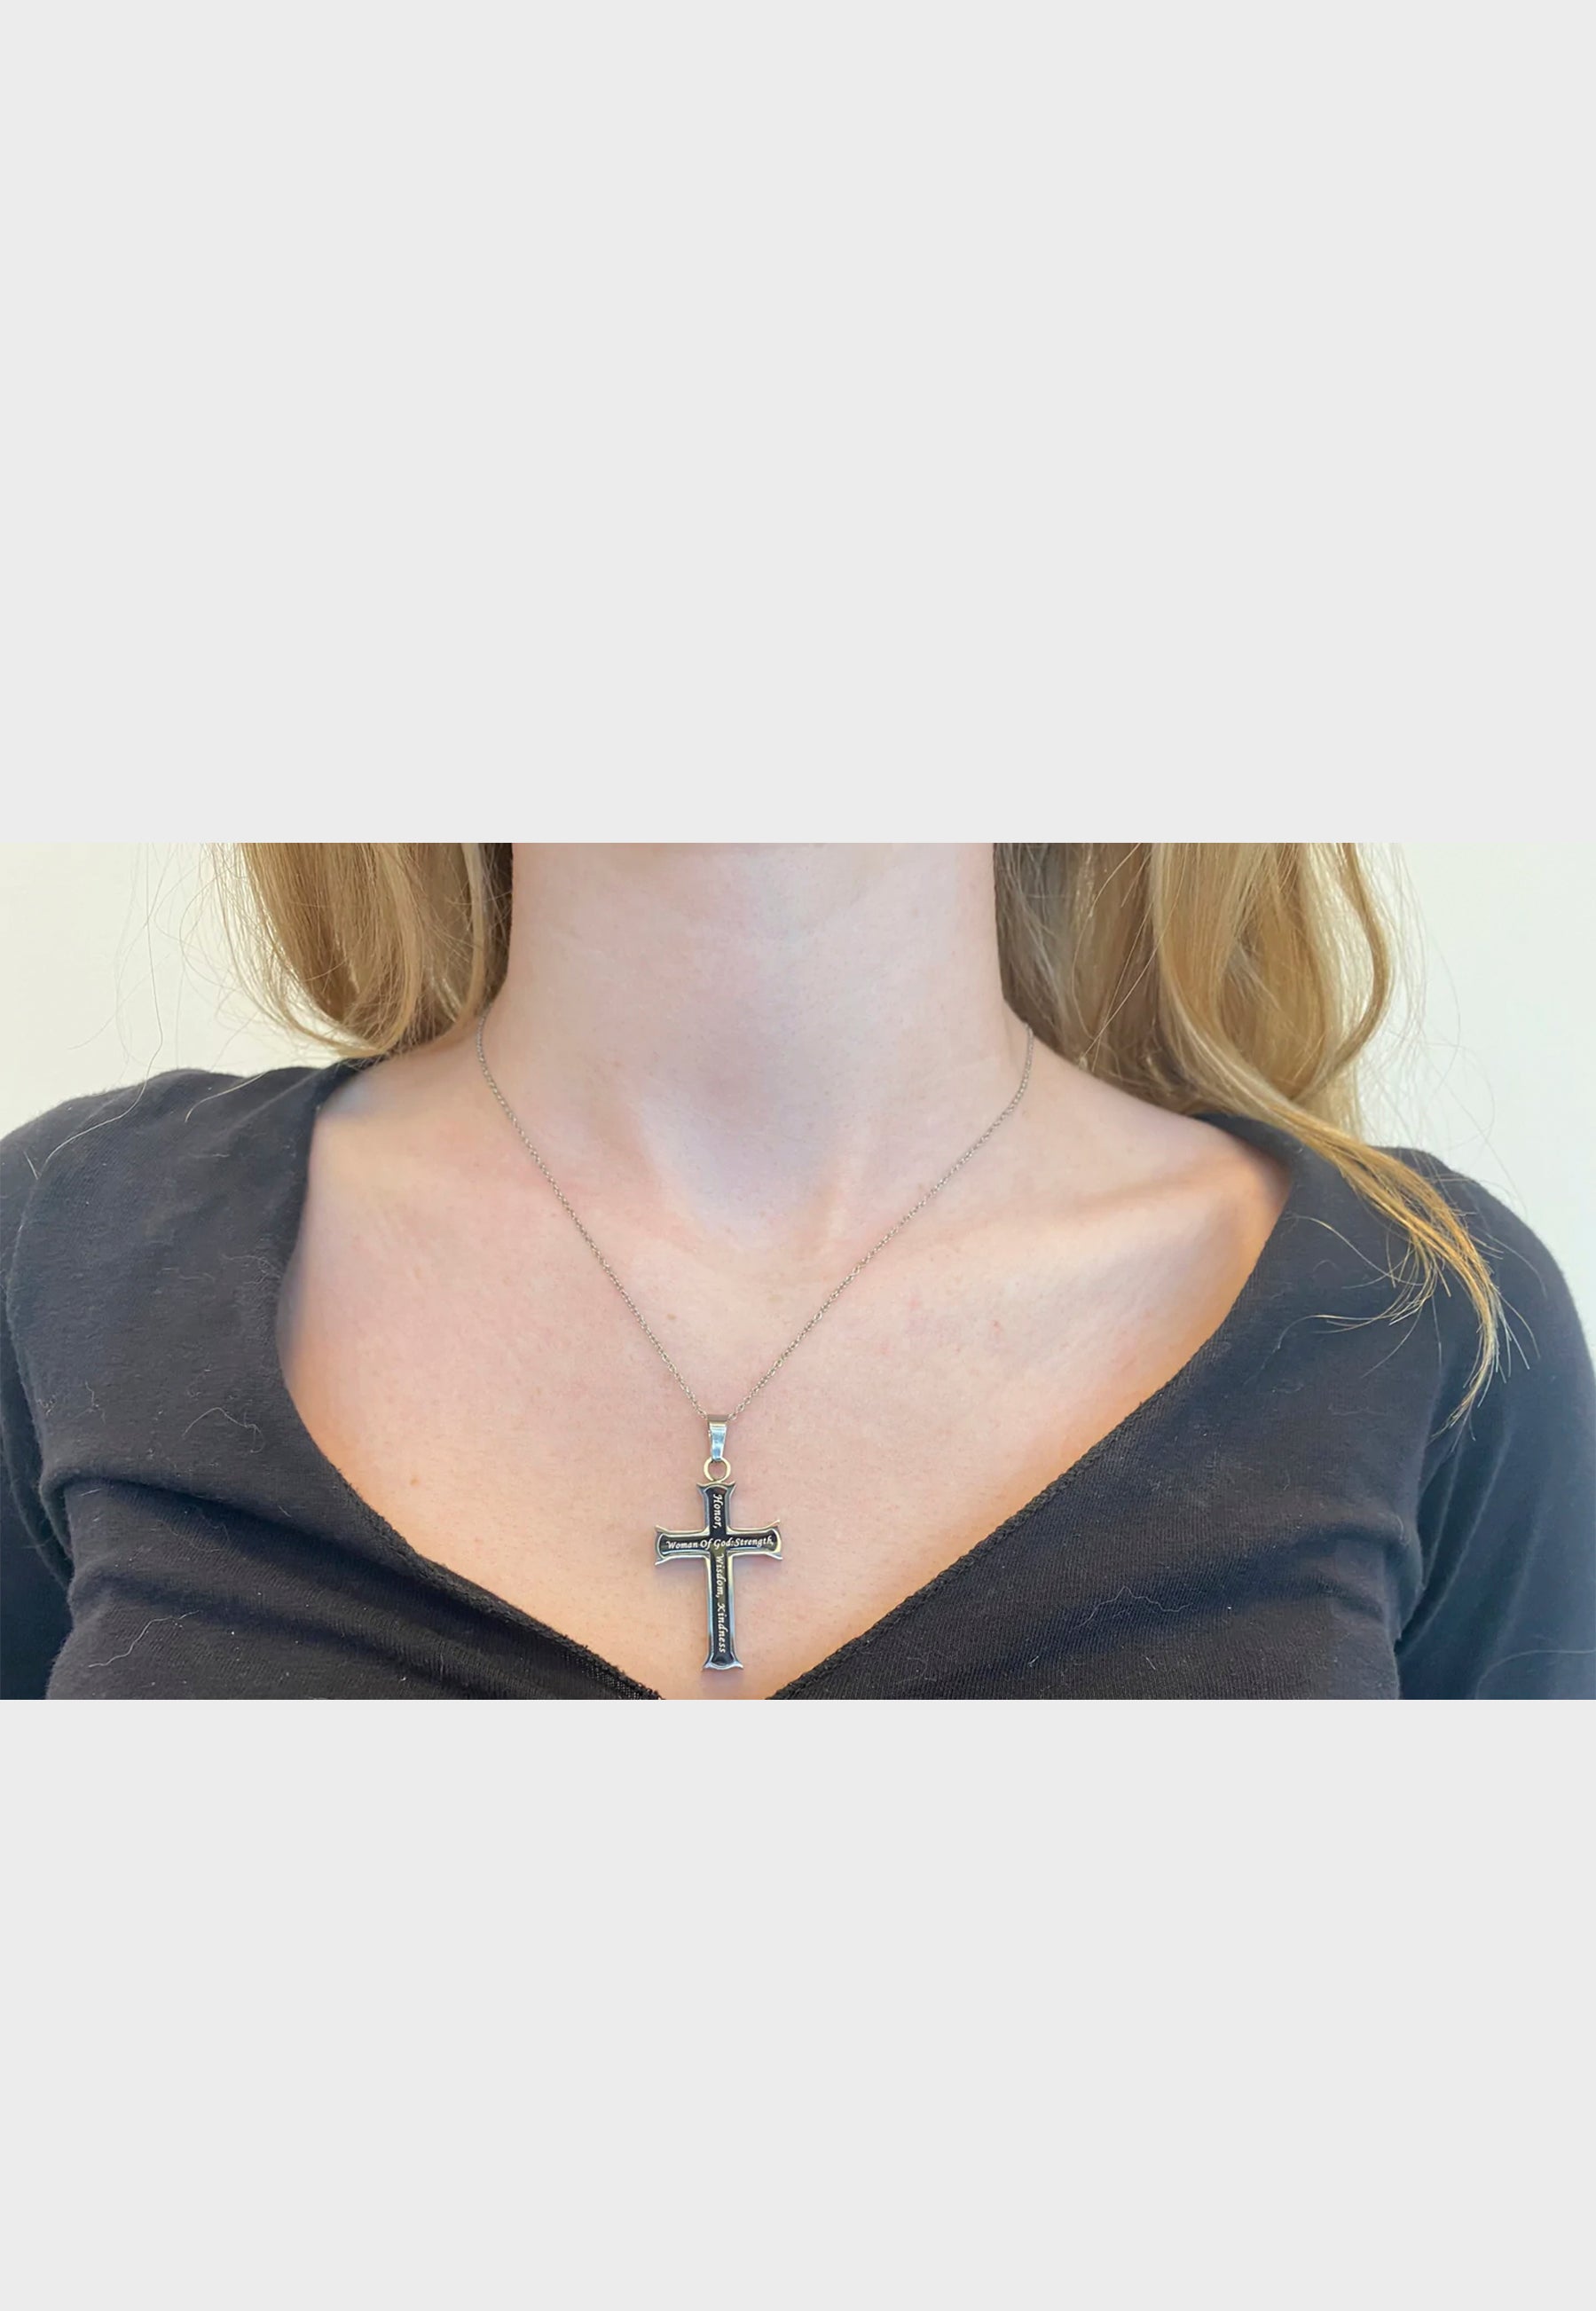 BEST SELLER Gold Crucifix Cross Necklace Women Miraculous Sterling Silver  Double Charm Necklaces Catholic Jewelry Confirmation Gift Small - Etsy | Cross  necklace women, Crucifix necklace women, Sterling silver cross necklace